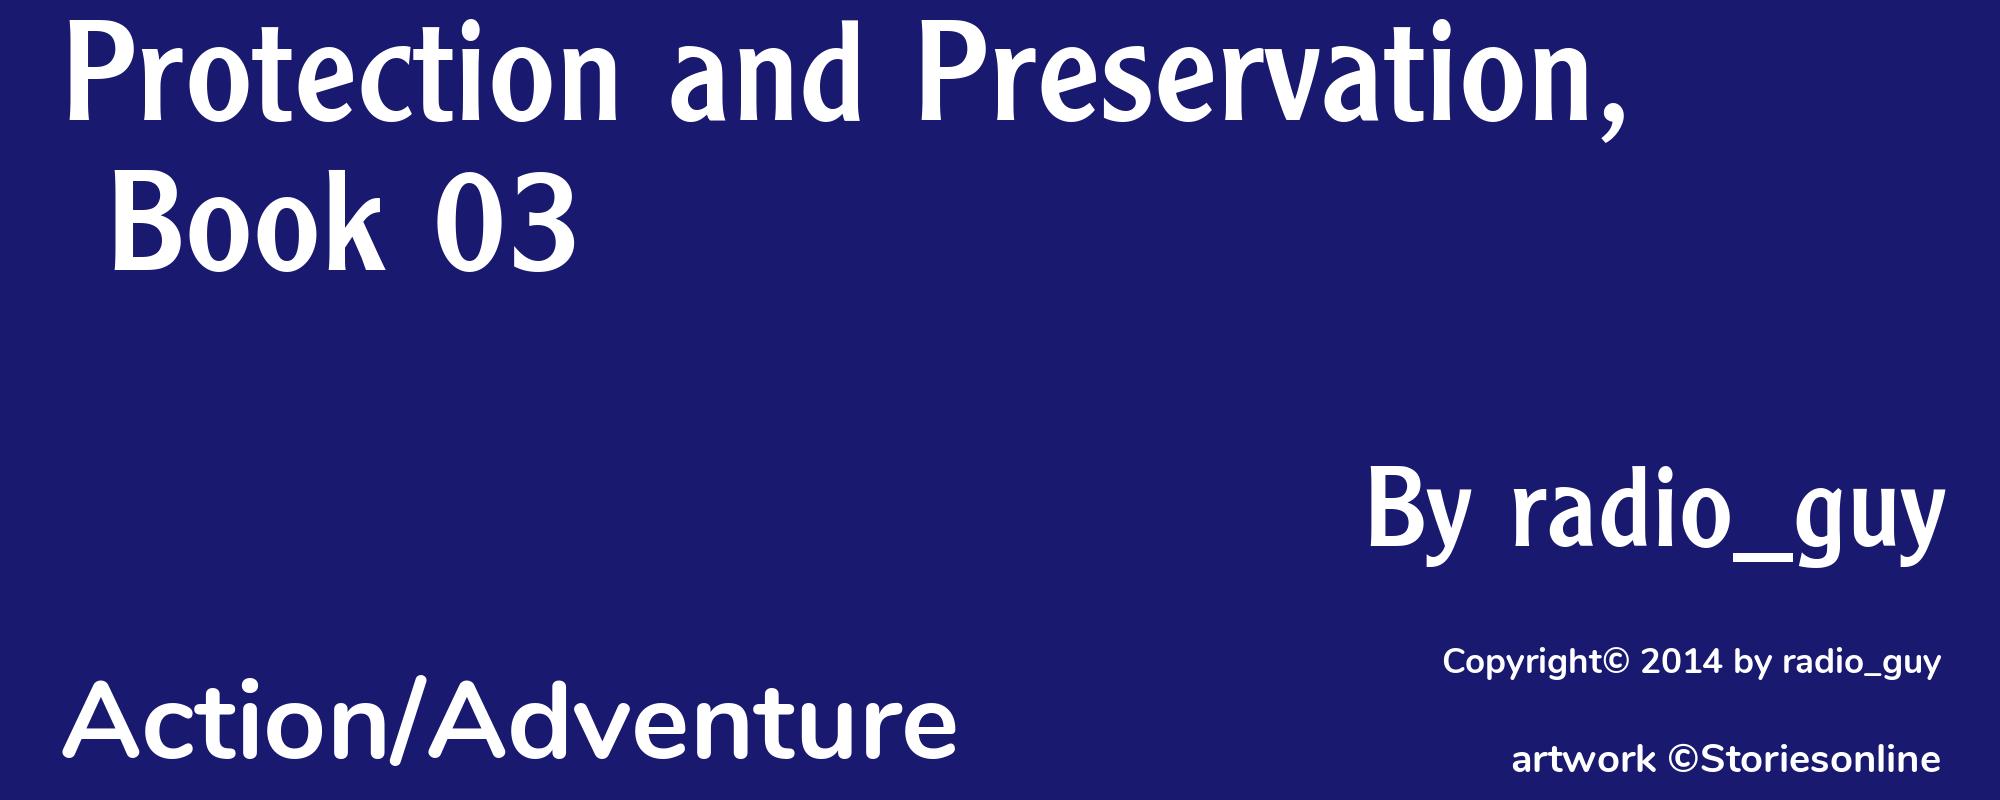 Protection and Preservation, Book 03 - Cover